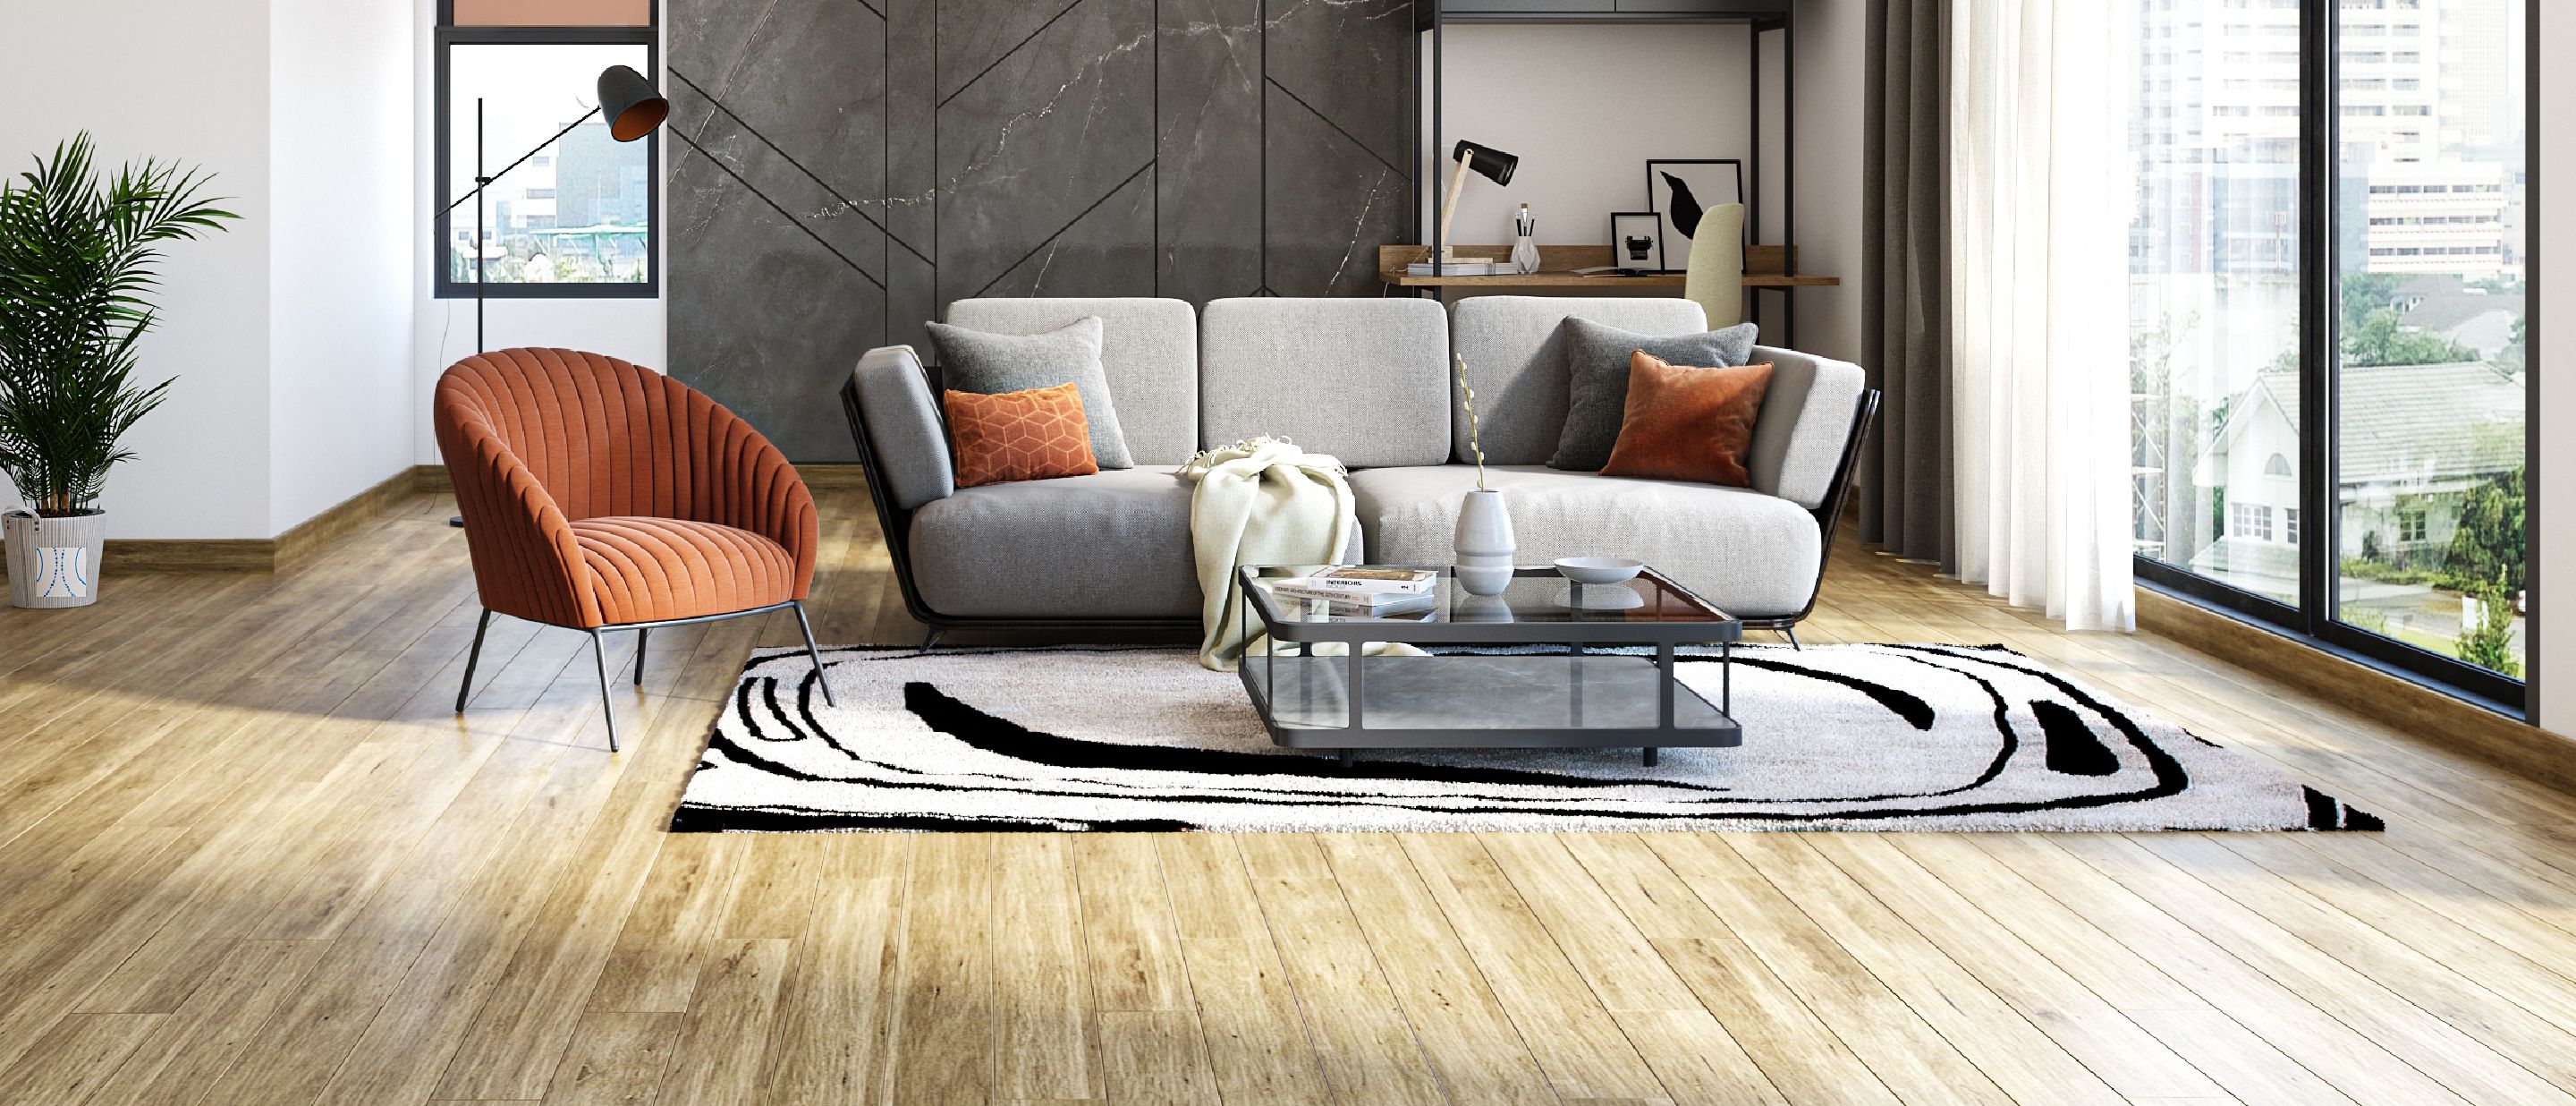 Asia's largest home interiors brand is now in Malaysia